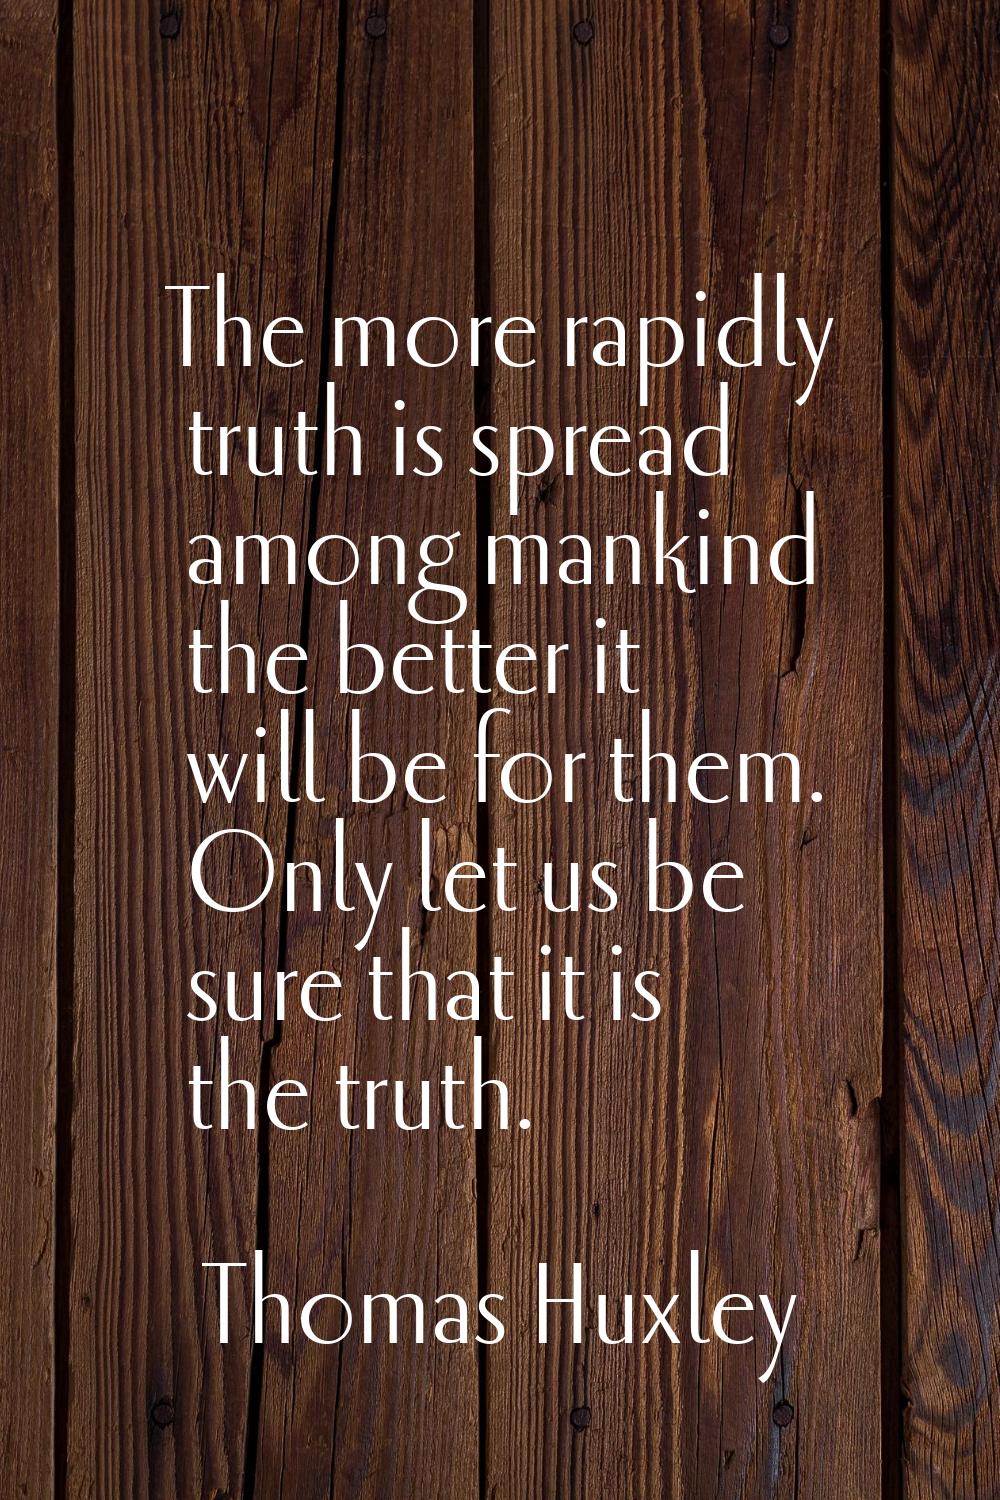 The more rapidly truth is spread among mankind the better it will be for them. Only let us be sure 